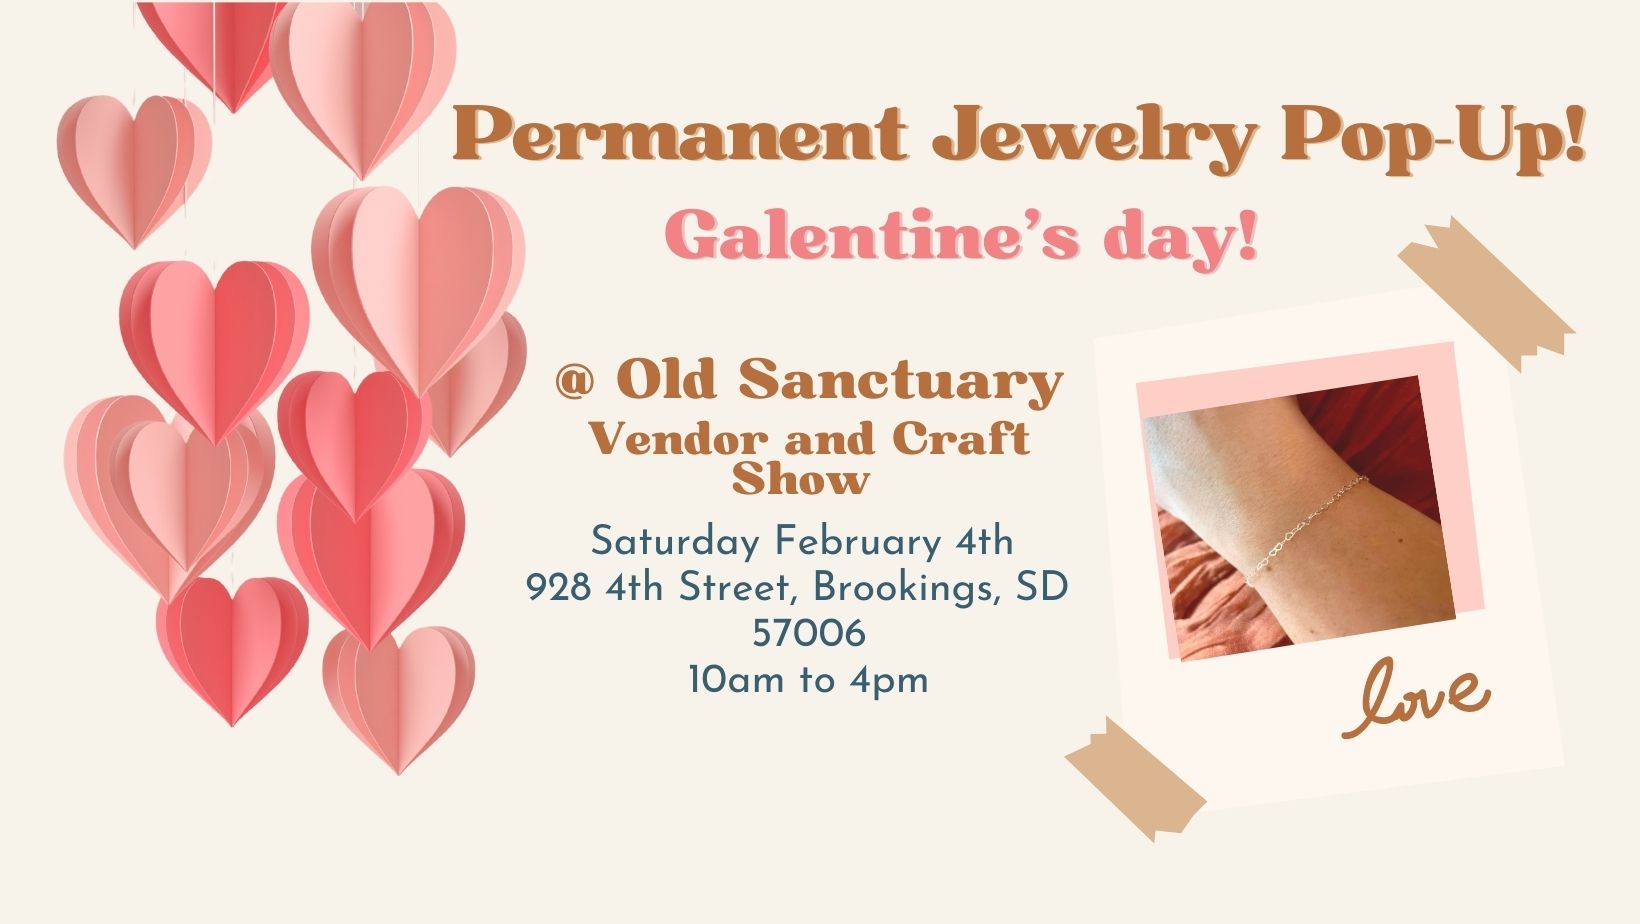 Galentine’s Day Permanent Jewelry Pop-up at The Old Sanctuary!